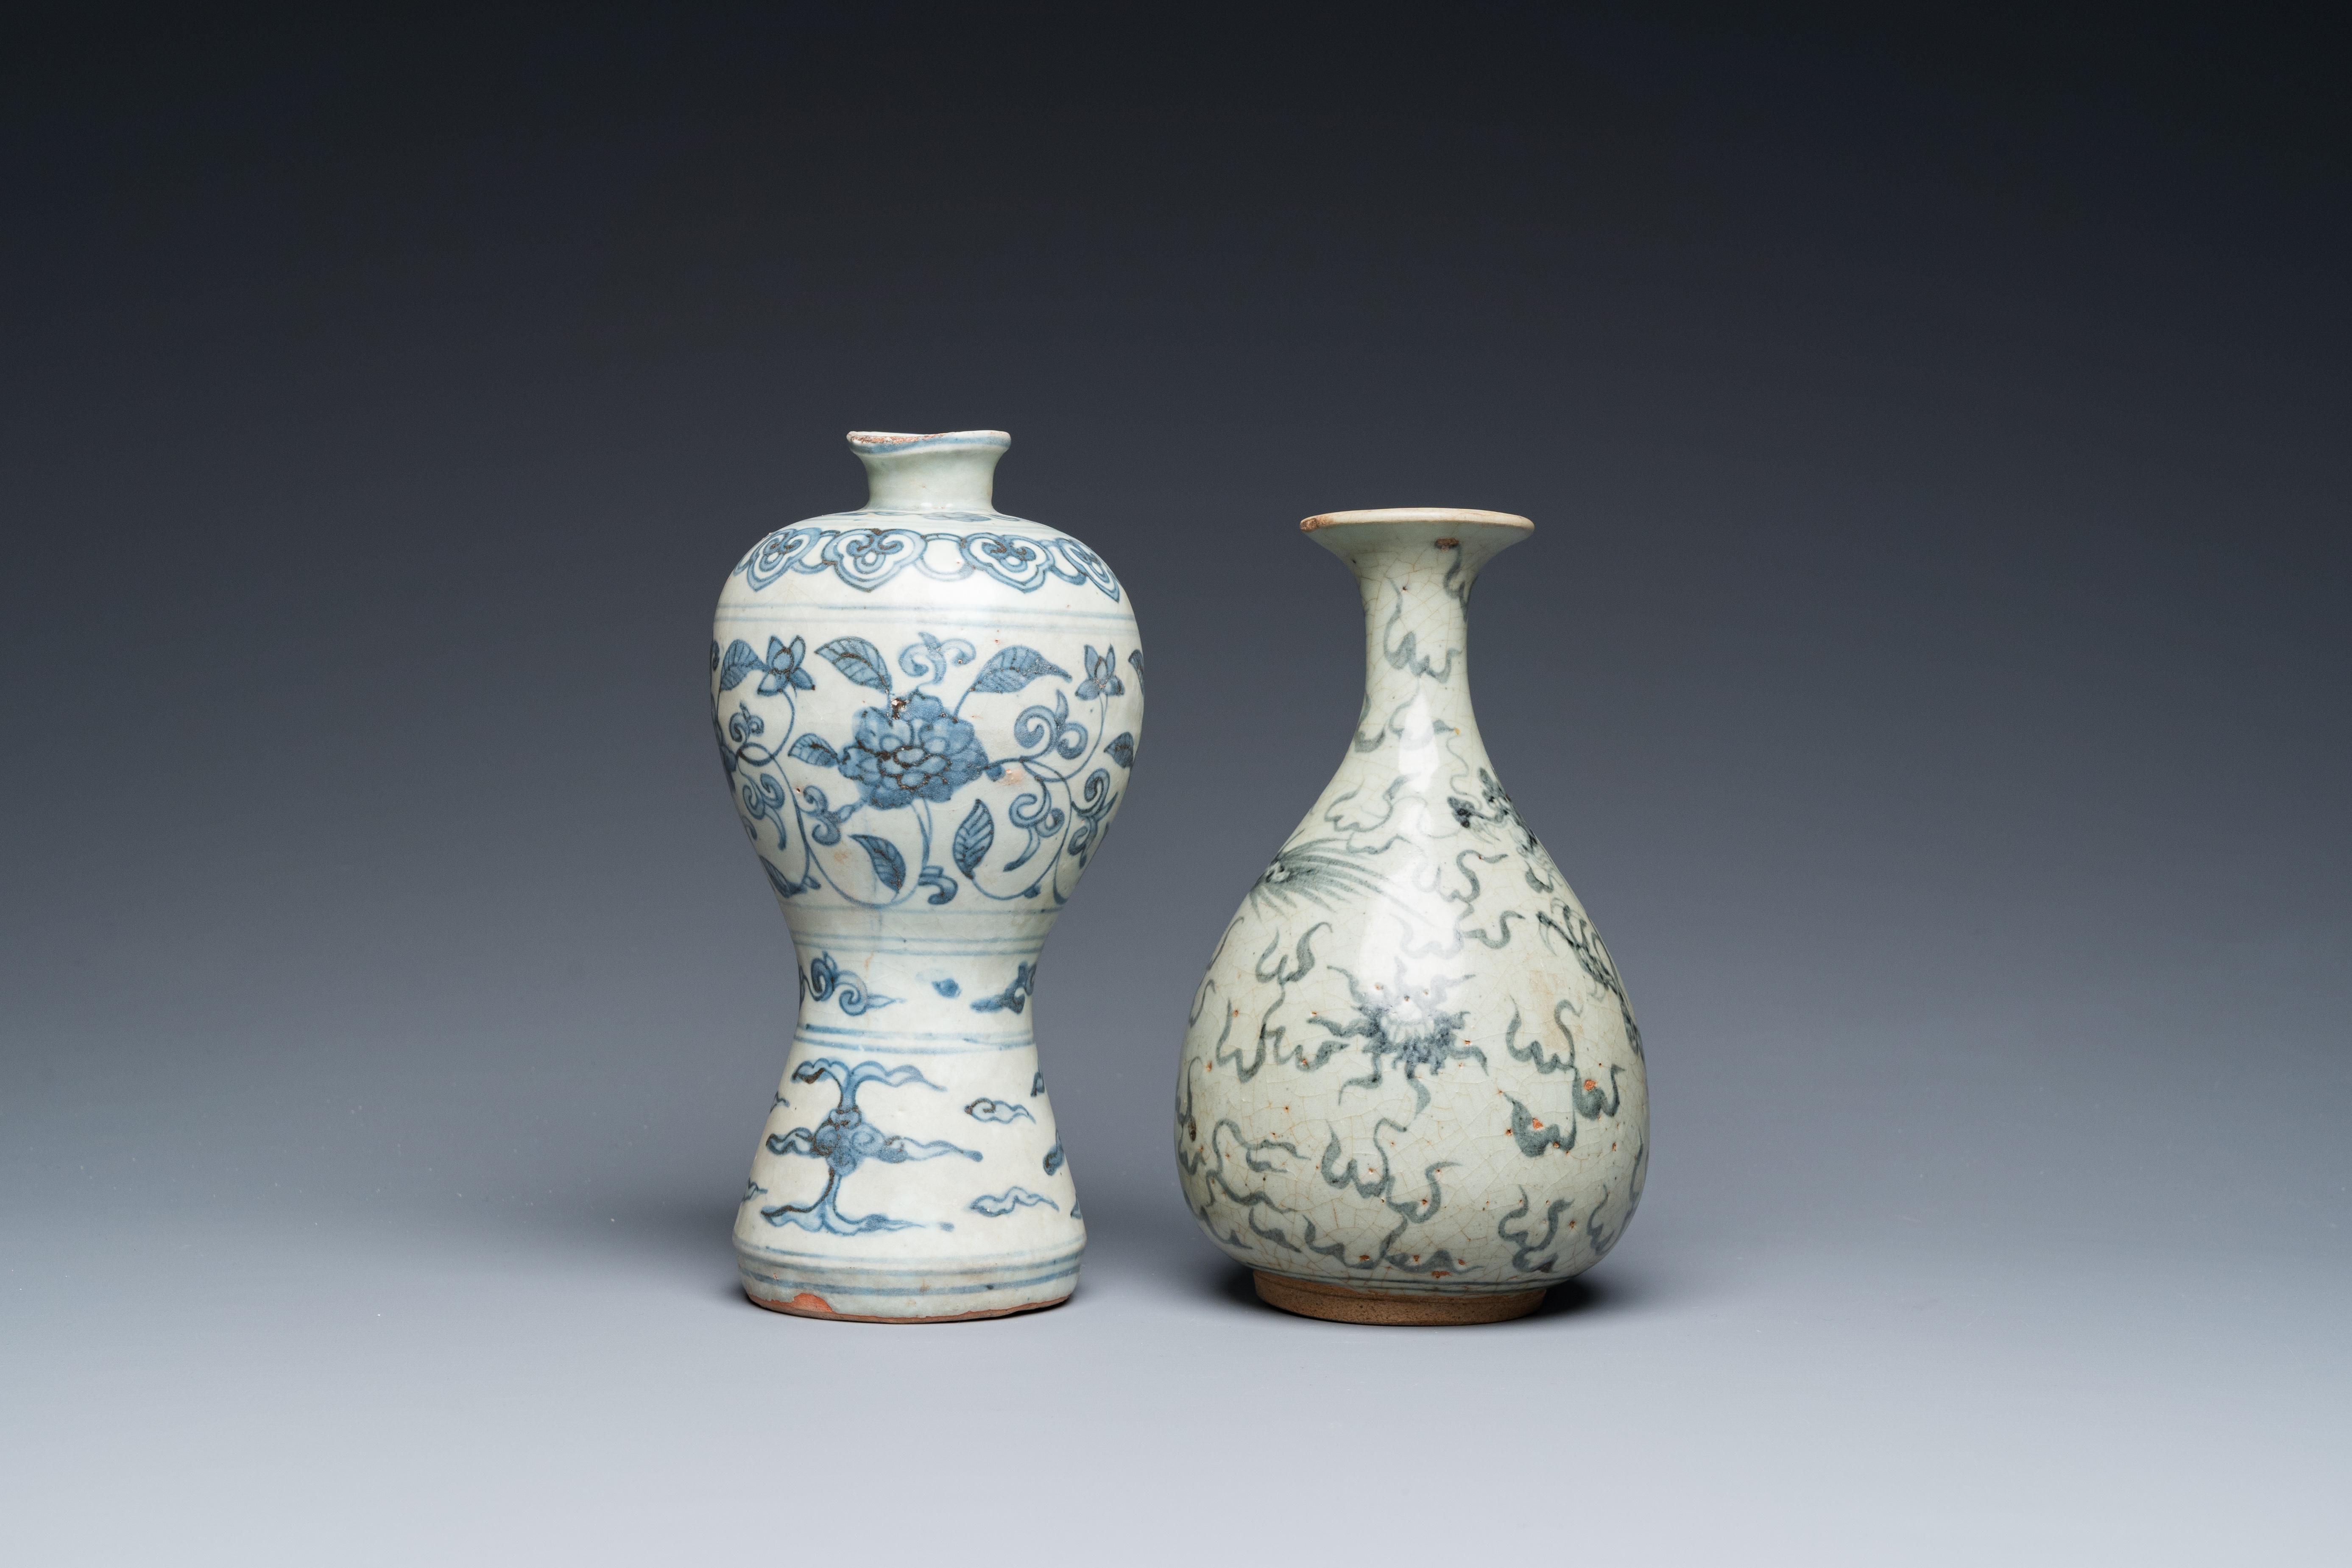 A Chinese blue and white 'meiping' vase and a 'yuhuchunping' vase, Ming or later - Image 4 of 6